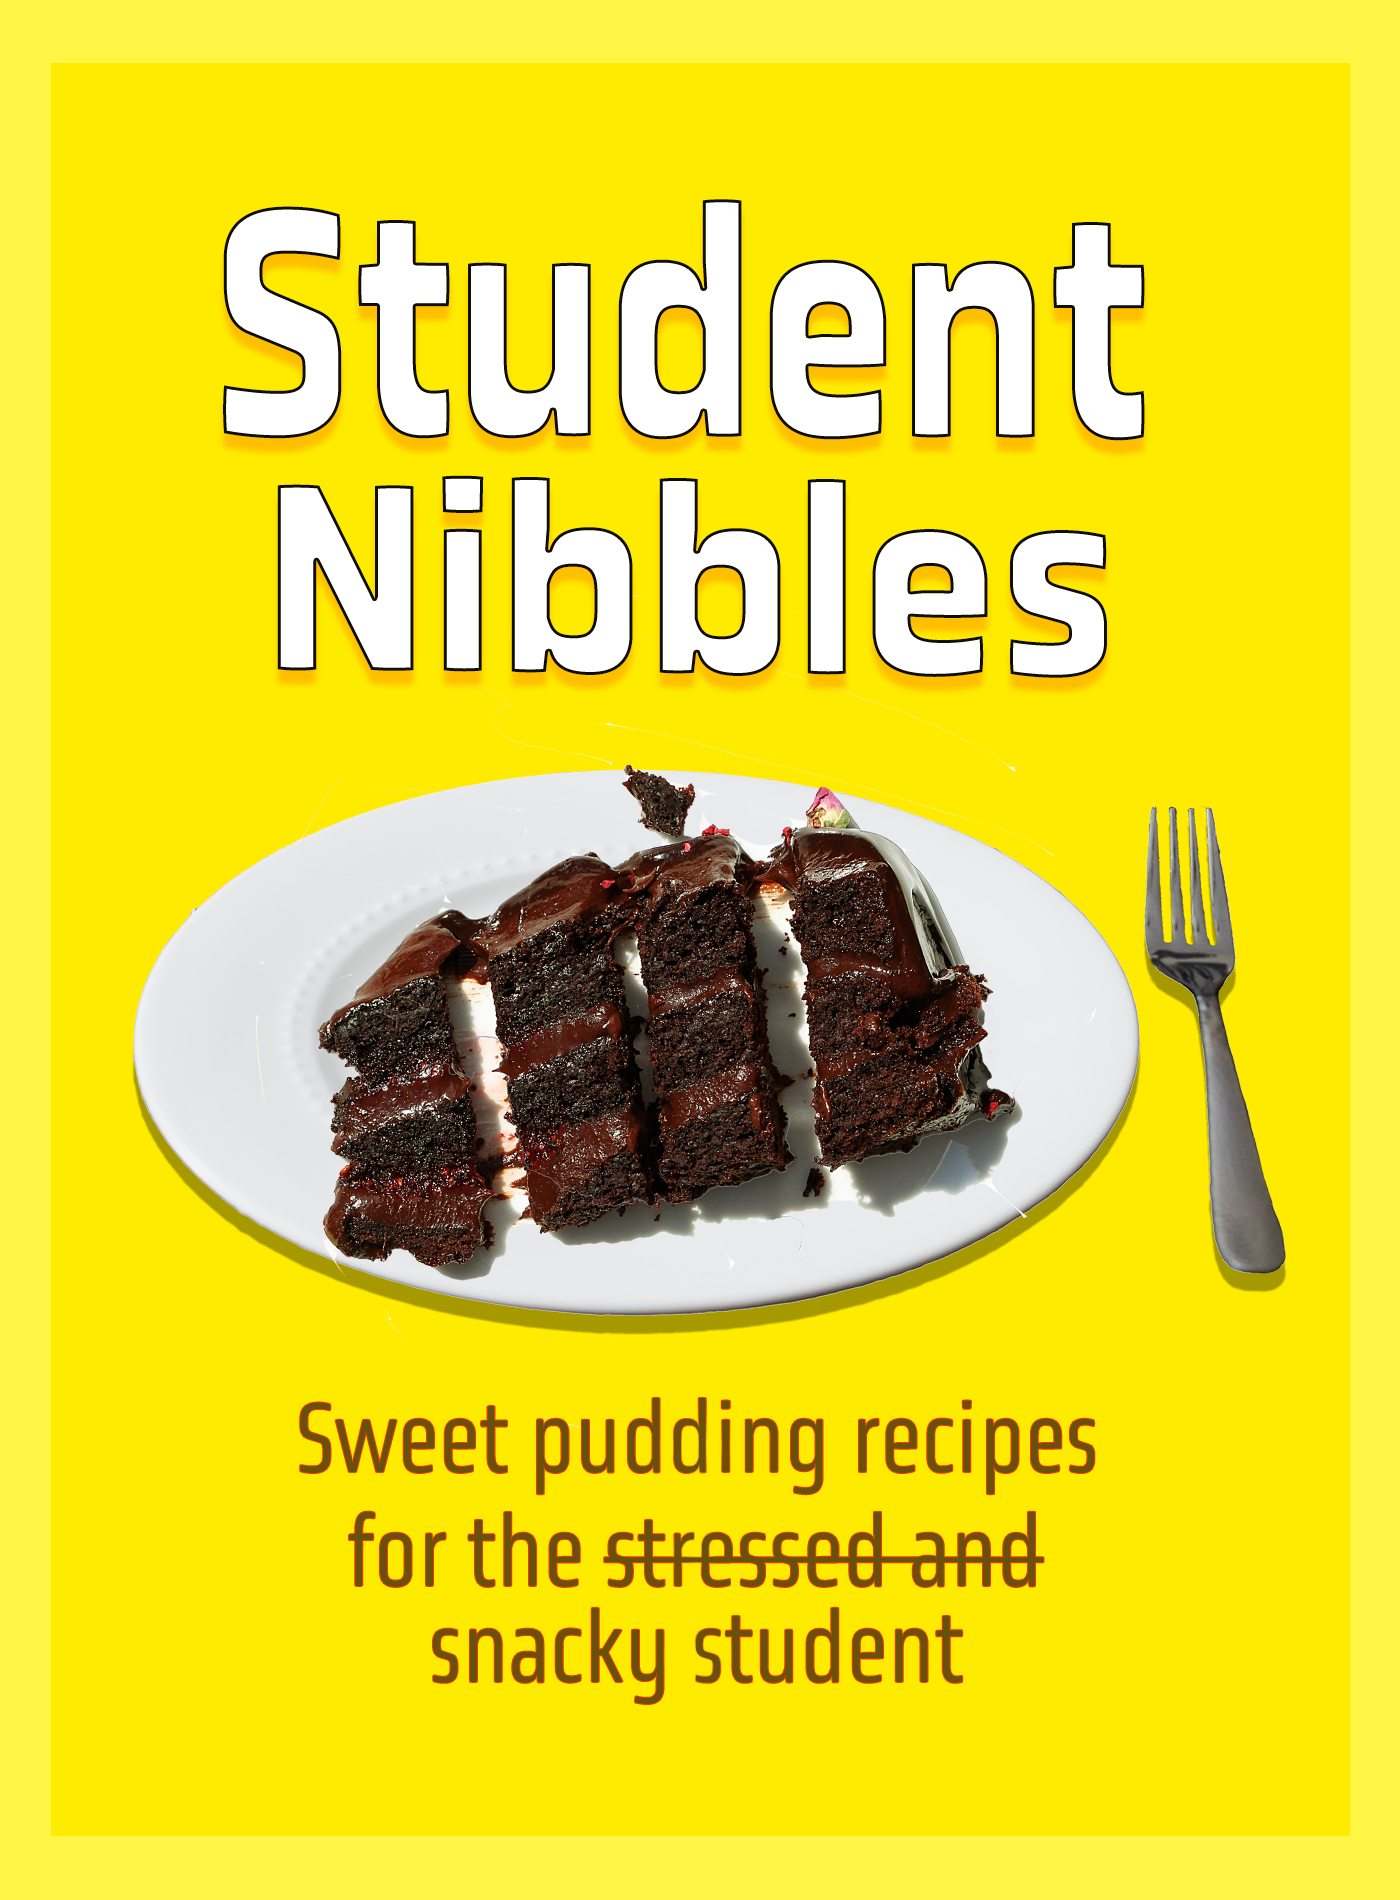 Student Nibbles title with yellow background with chocolate cake and fork with subtitle: "Sweet pudding recipes for the stressed and snacky student" in a dark brown font